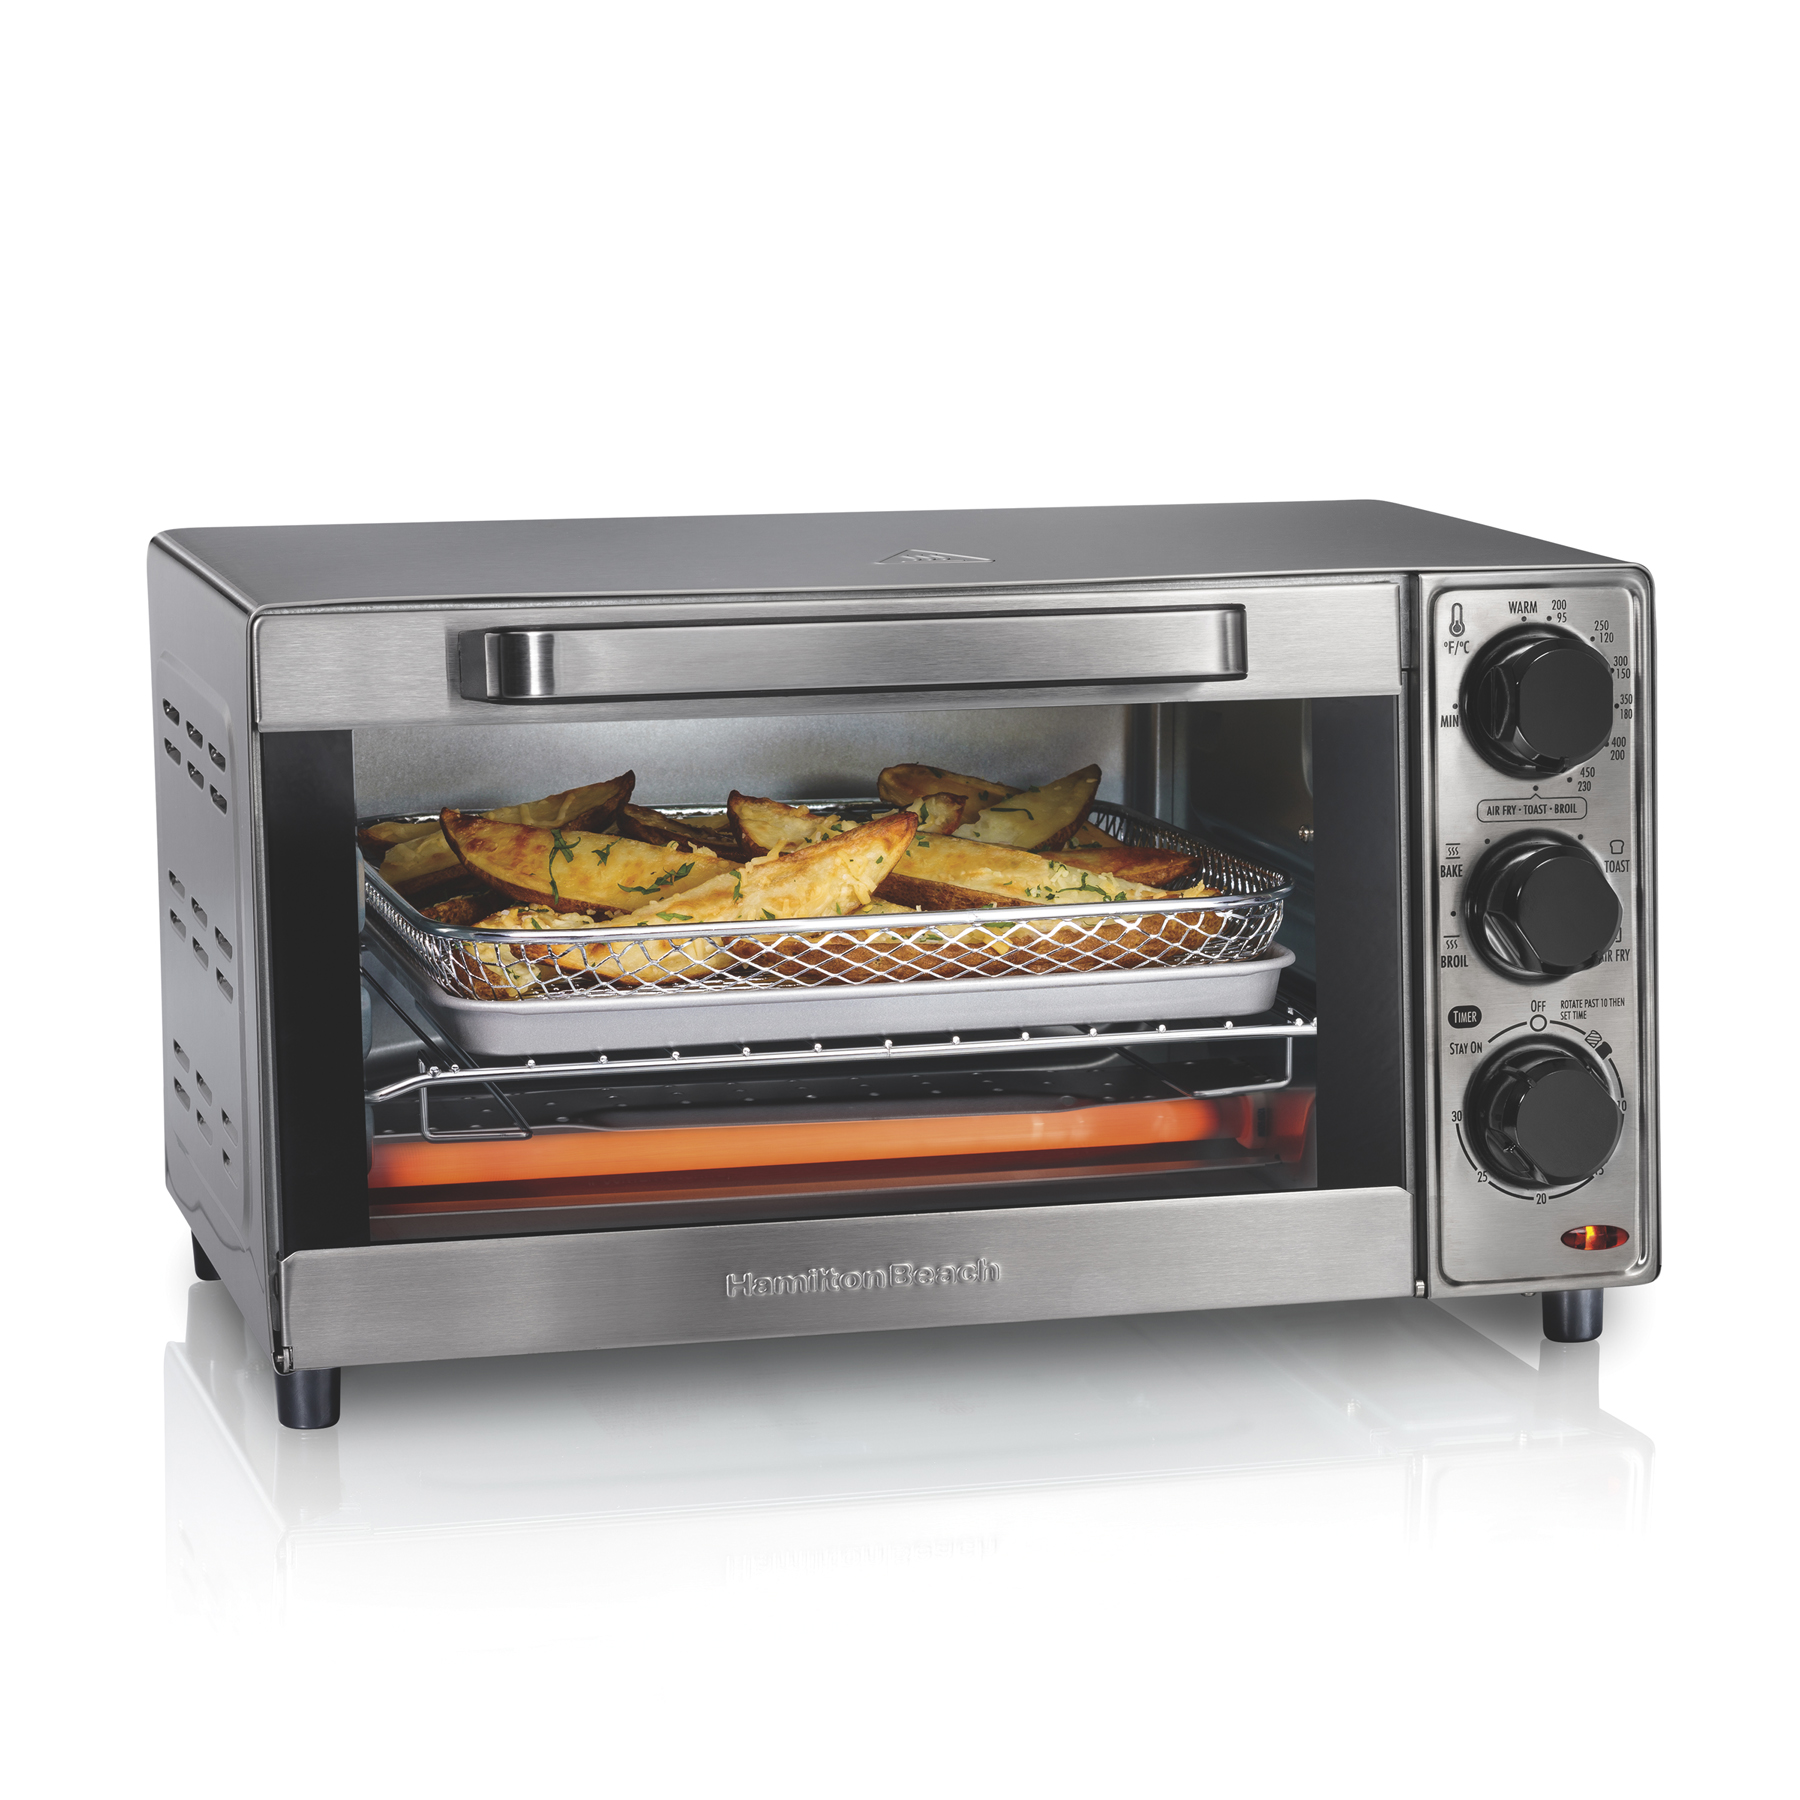 Oven Toaster Oven